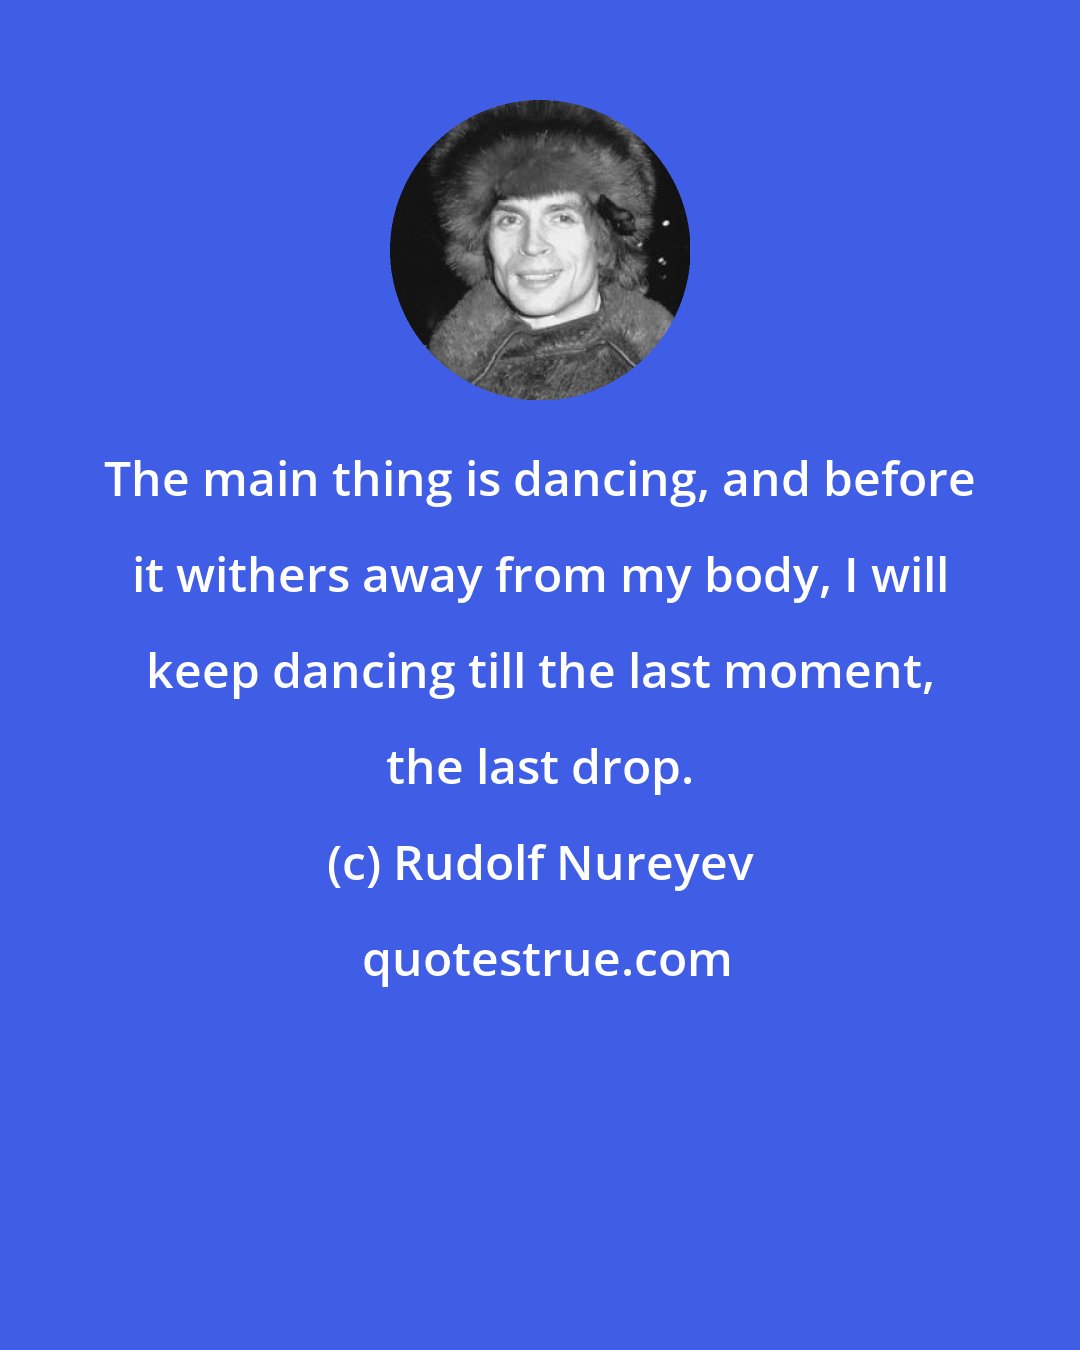 Rudolf Nureyev: The main thing is dancing, and before it withers away from my body, I will keep dancing till the last moment, the last drop.